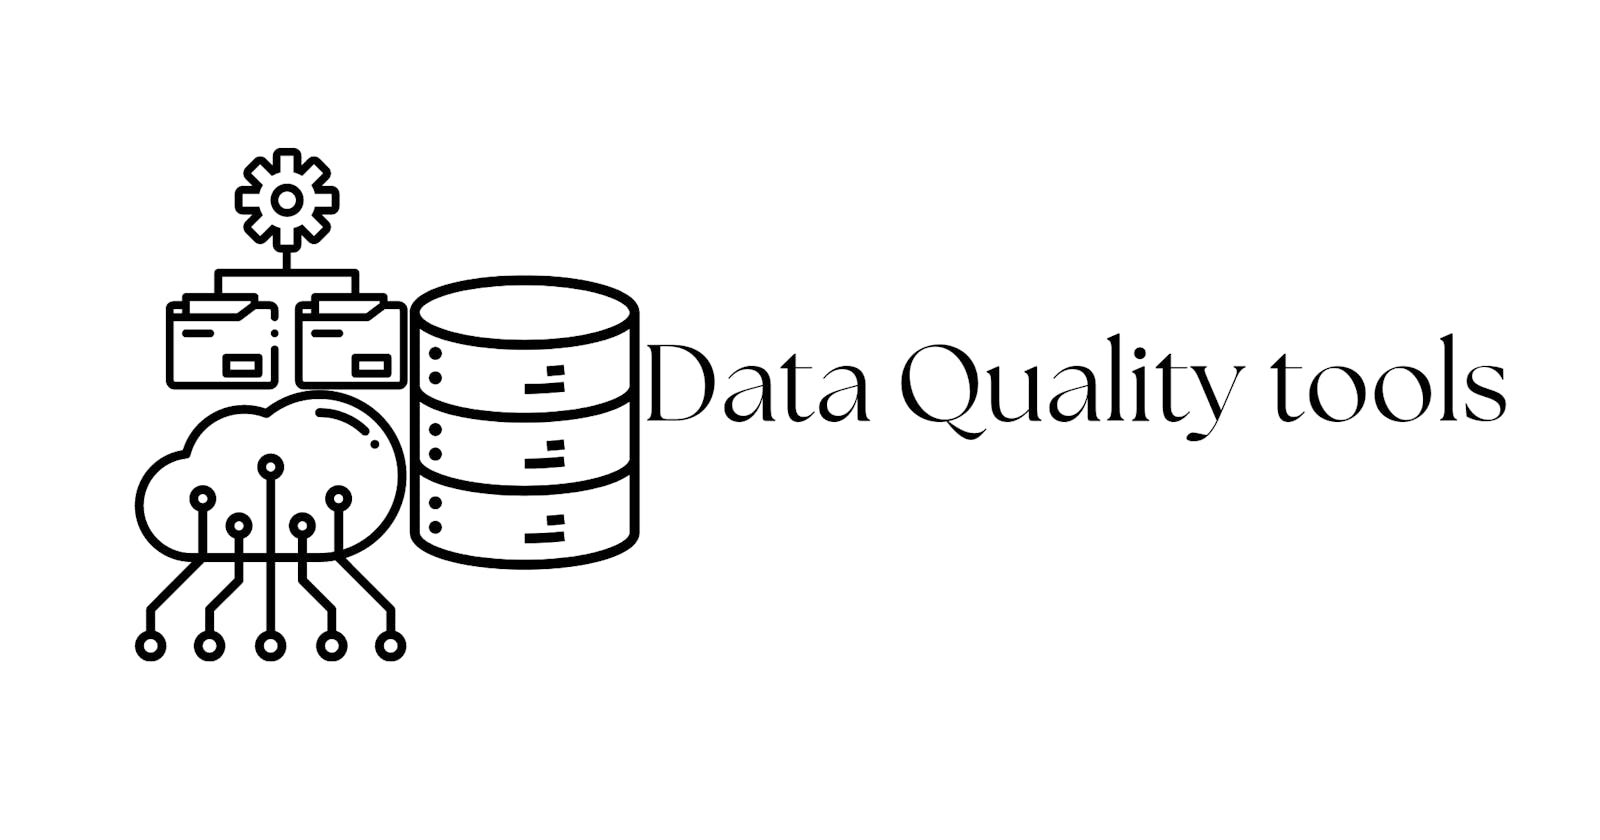 Open Source data quality tools.